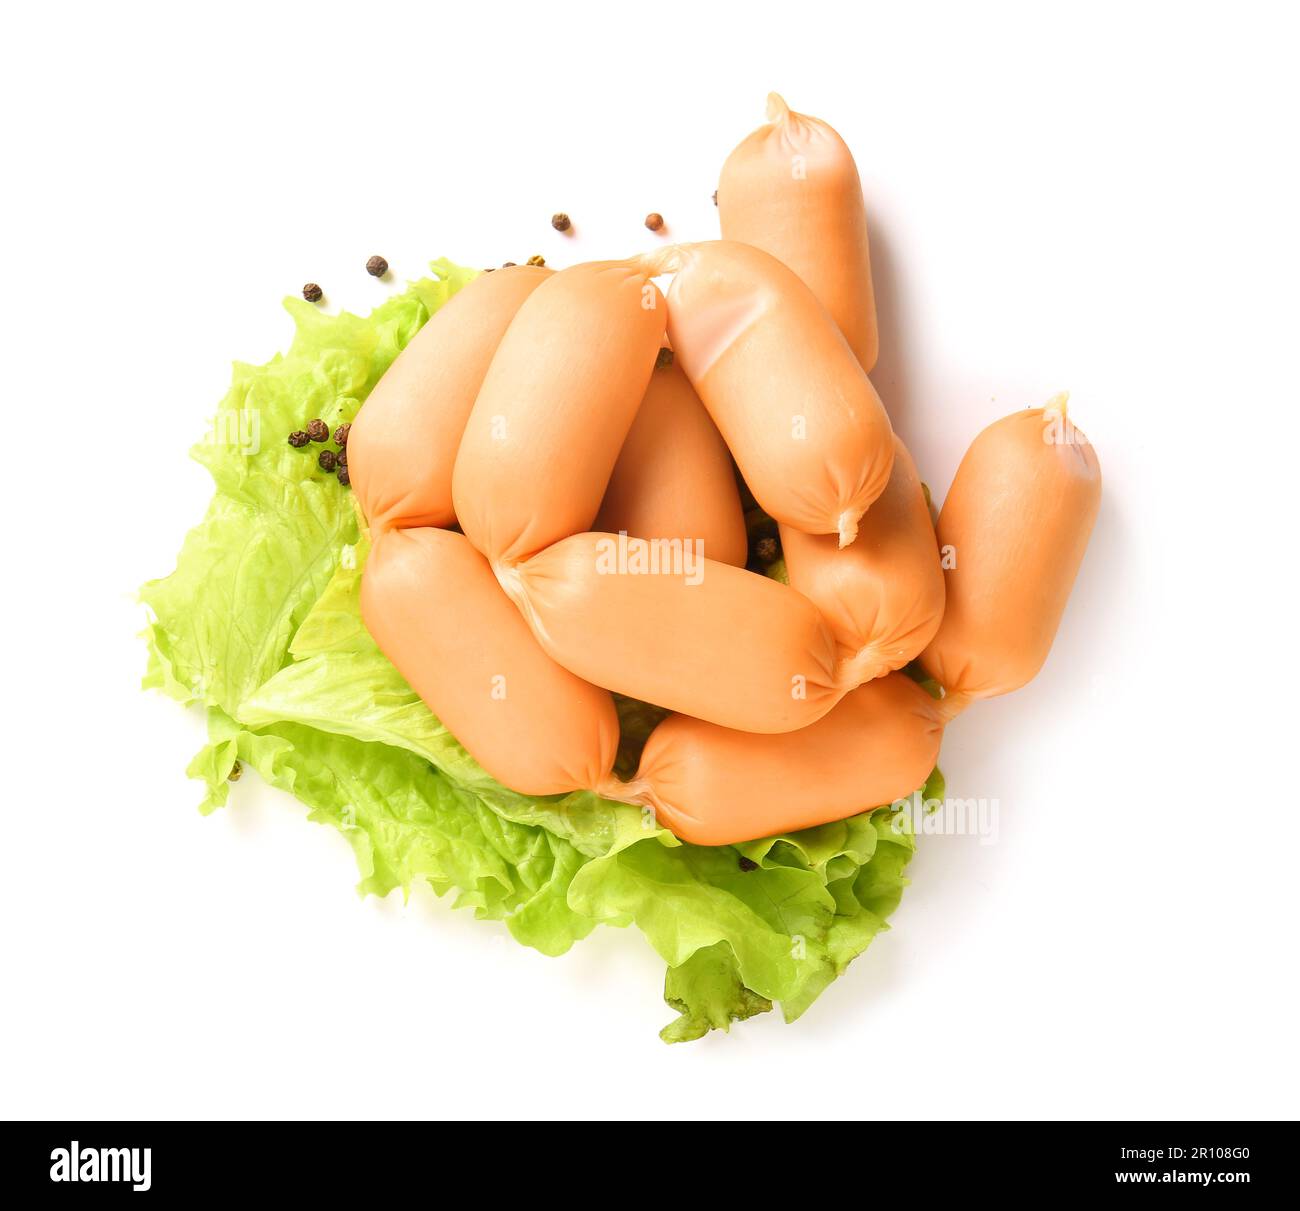 Tasty boiled sausages with lettuce and peppercorn on white background Stock Photo